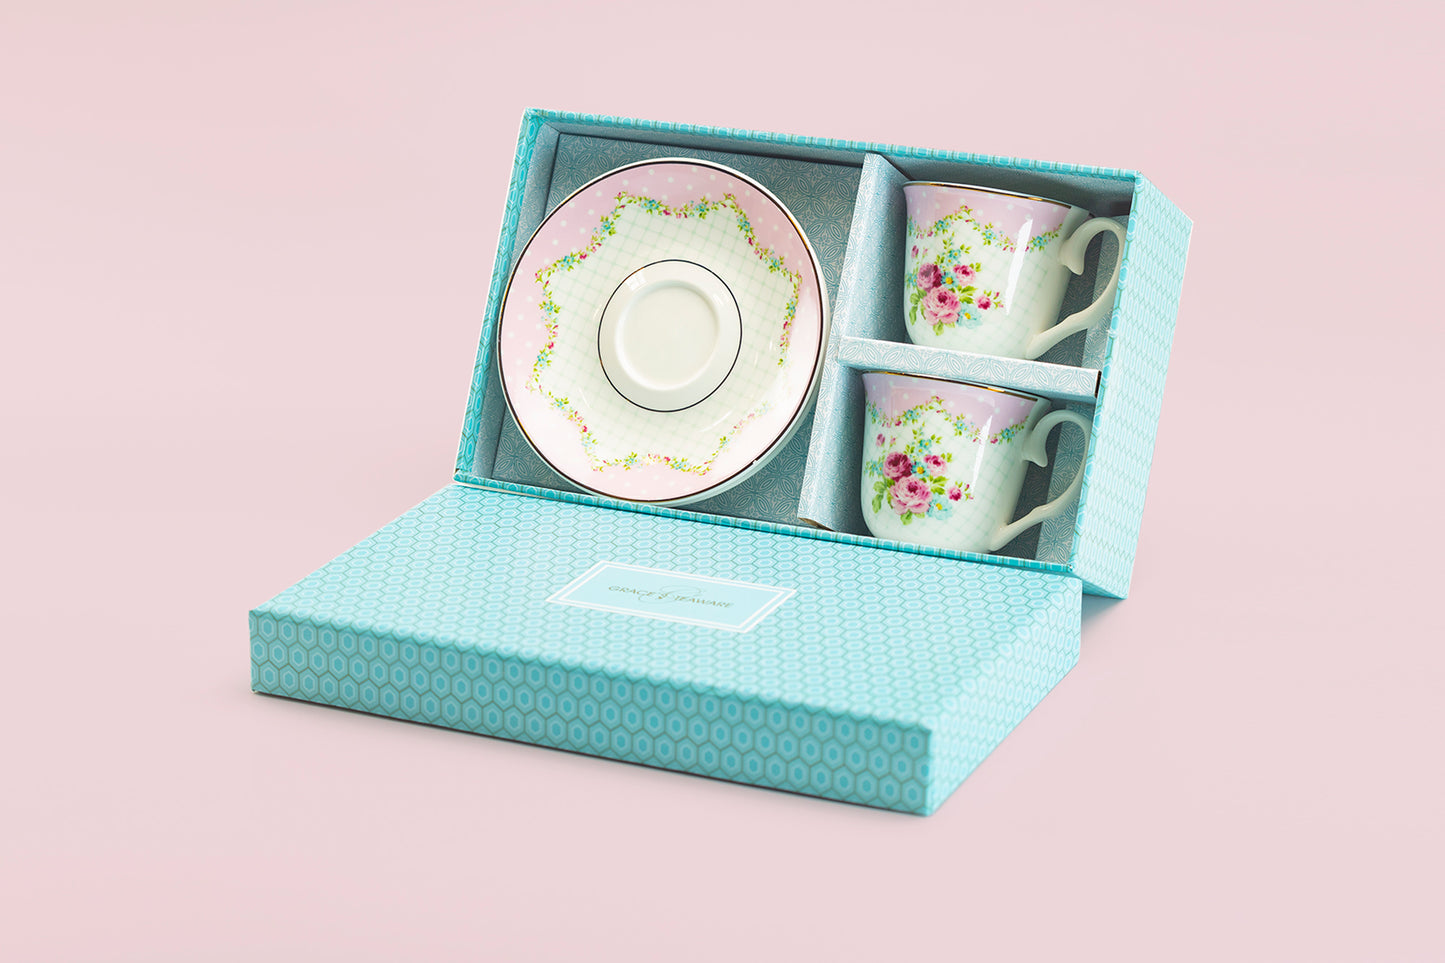 Pink Ashley Rose 2.7oz Espresso Cups and Saucers with Gift Box